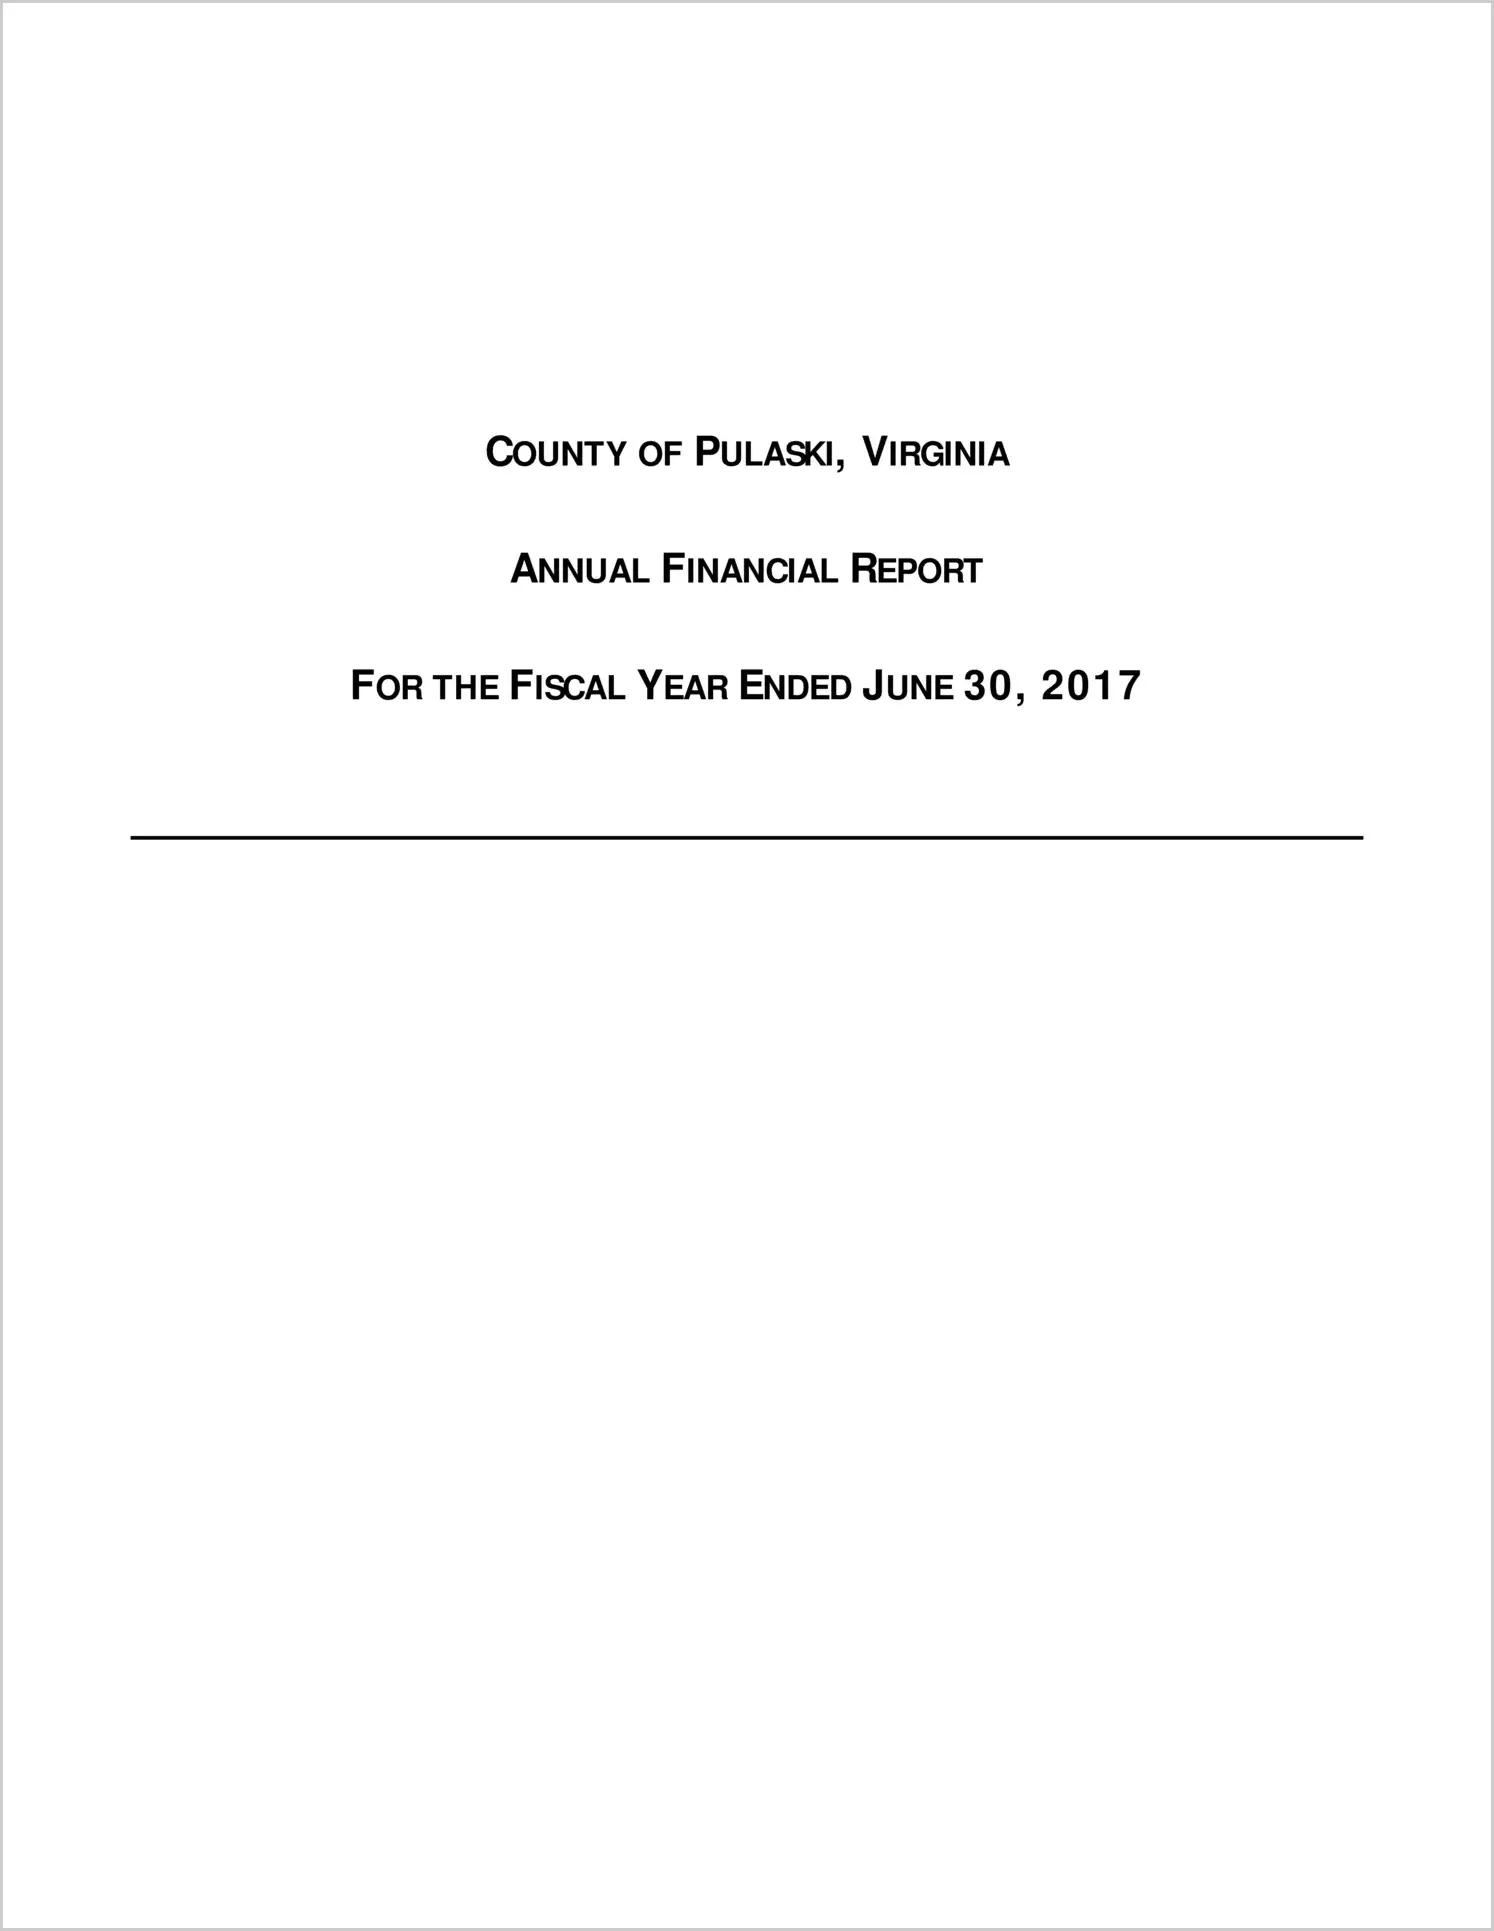 2017 Annual Financial Report for County of Pulaski